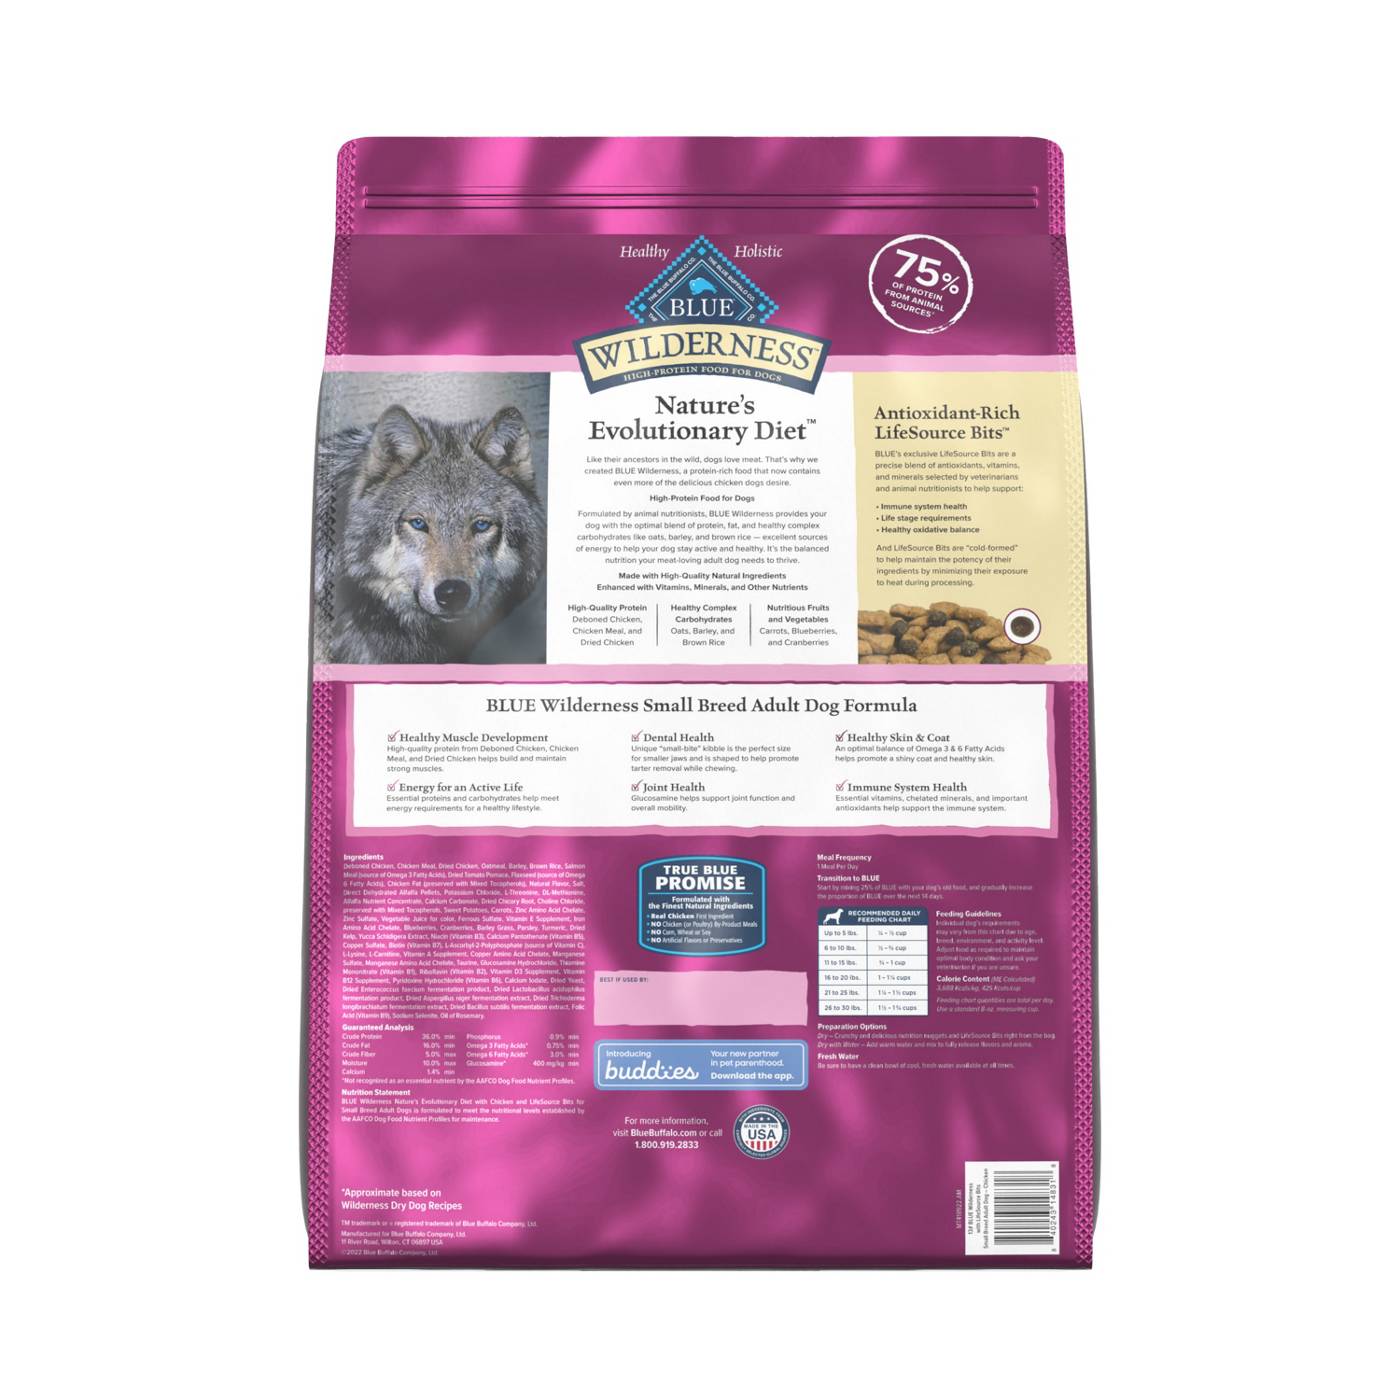 Blue Buffalo Wilderness Small Breed Chicken & LifeSource Bits Dry Dog Food; image 2 of 2